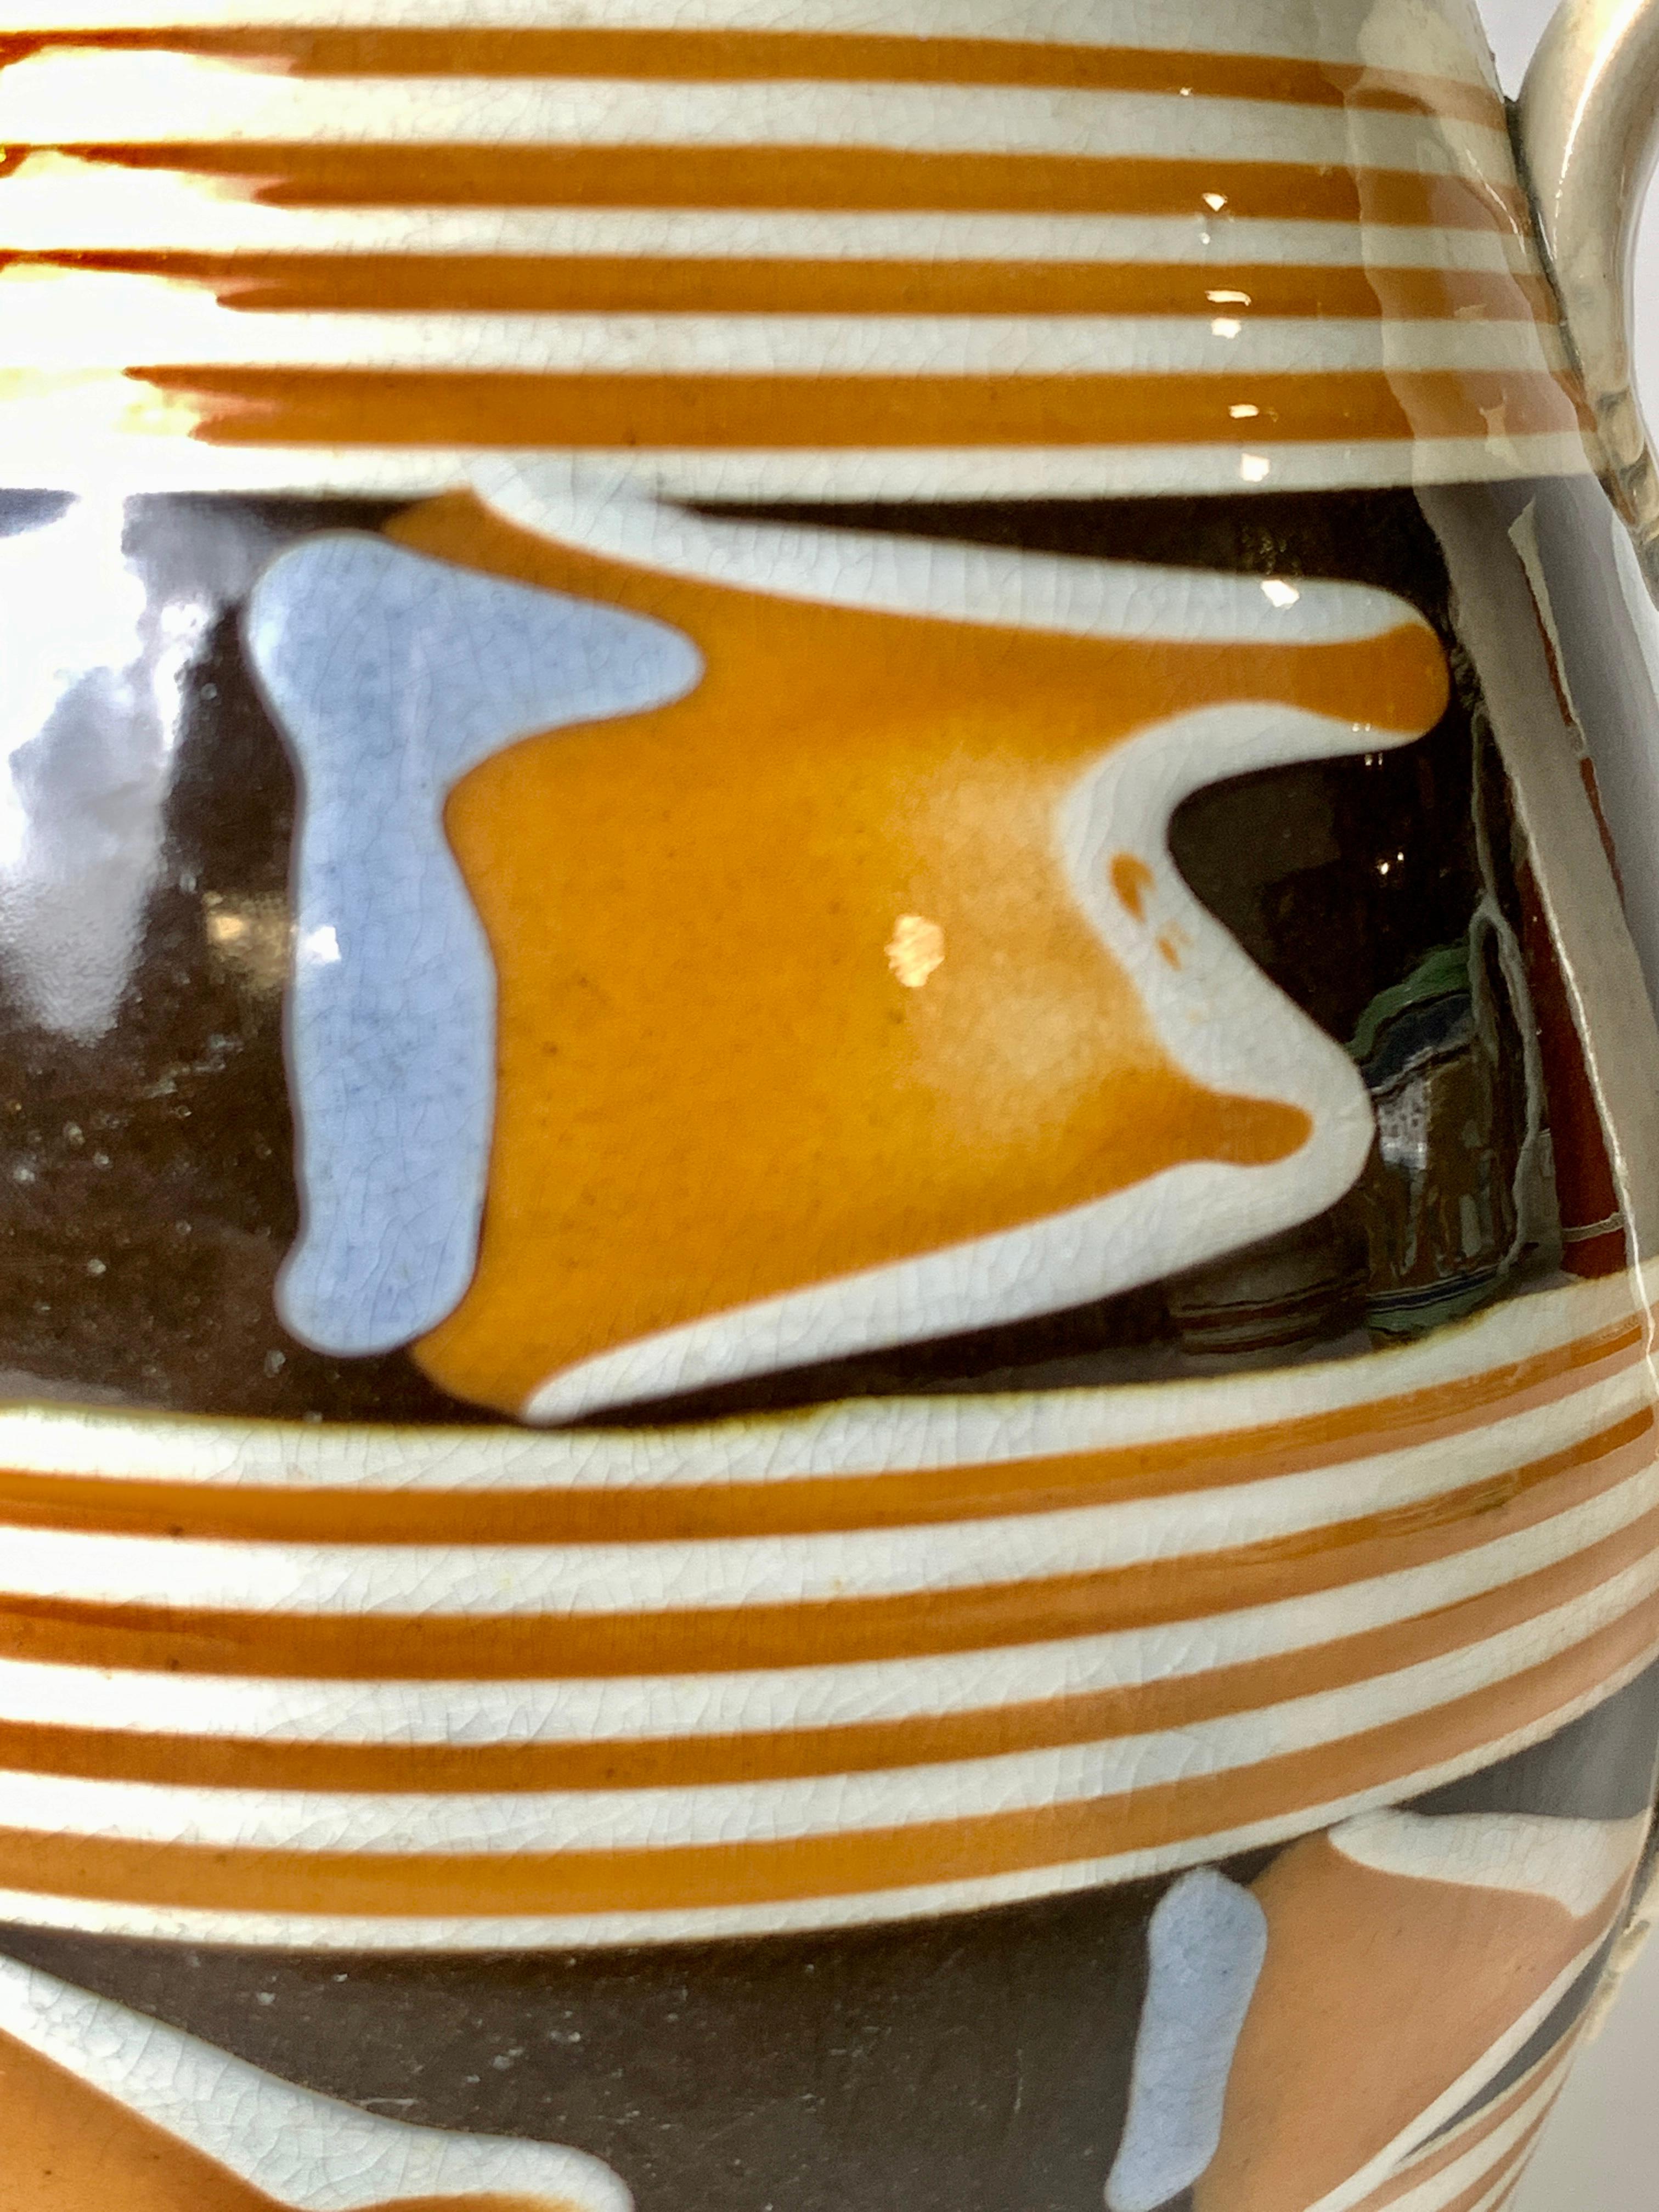 This mochaware pitcher was made of pearl glazed creamware in England circa 1820.
It has a unique design with freeform decoration in orange, light blue, and white on two wide black slip bands.
To make this design, the lathe operator would have